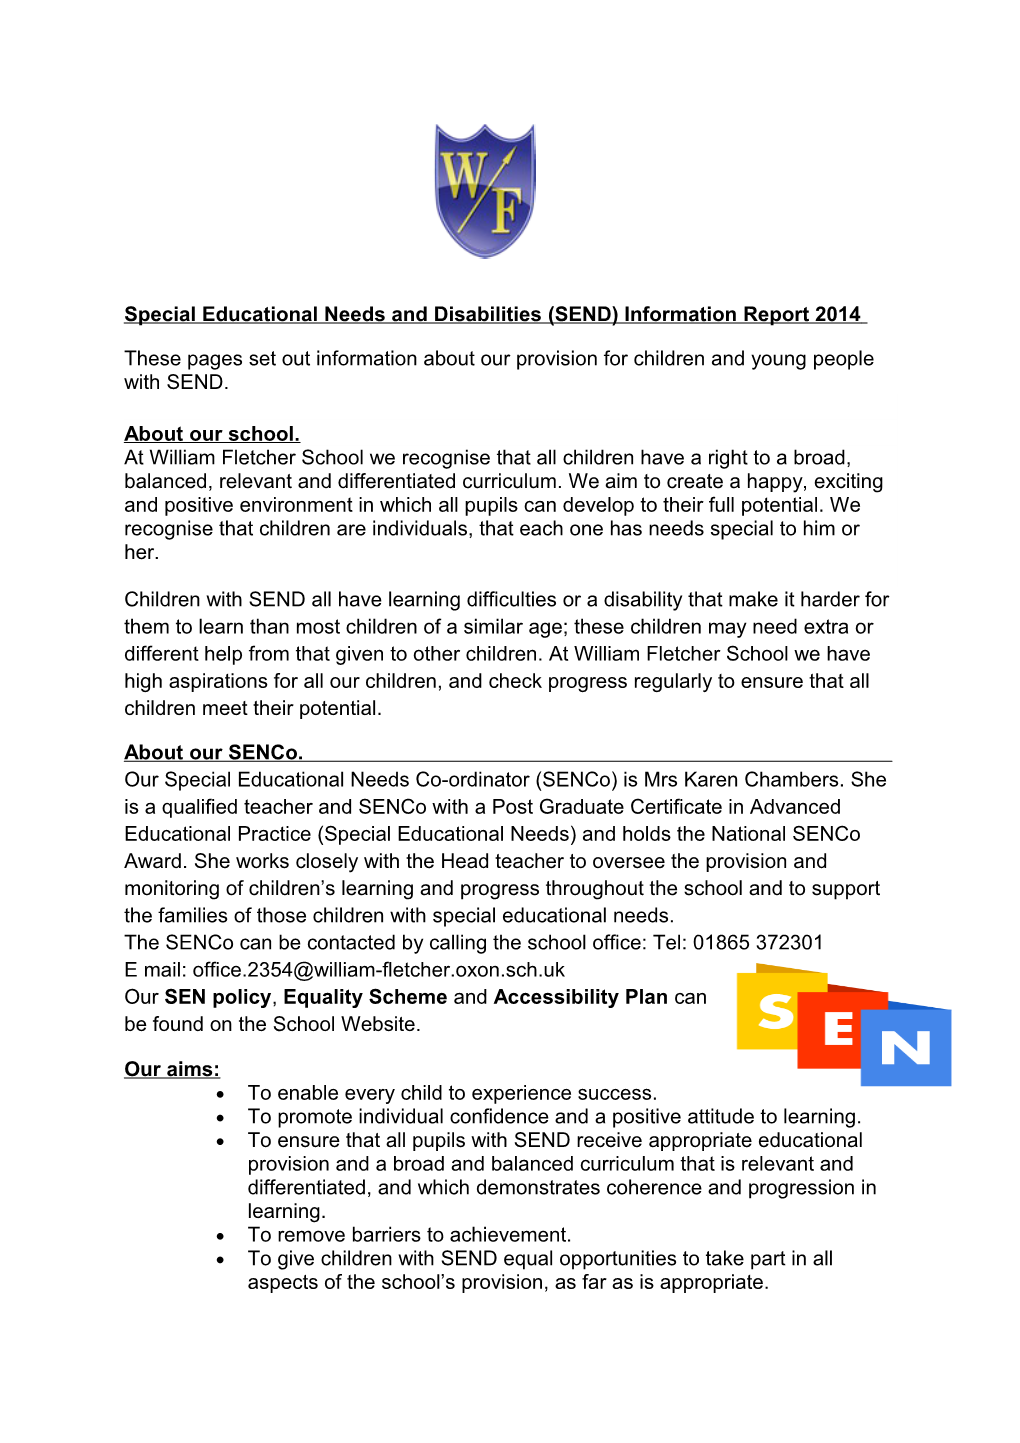 Special Educational Needs and Disabilities (SEND) Information Report 2014